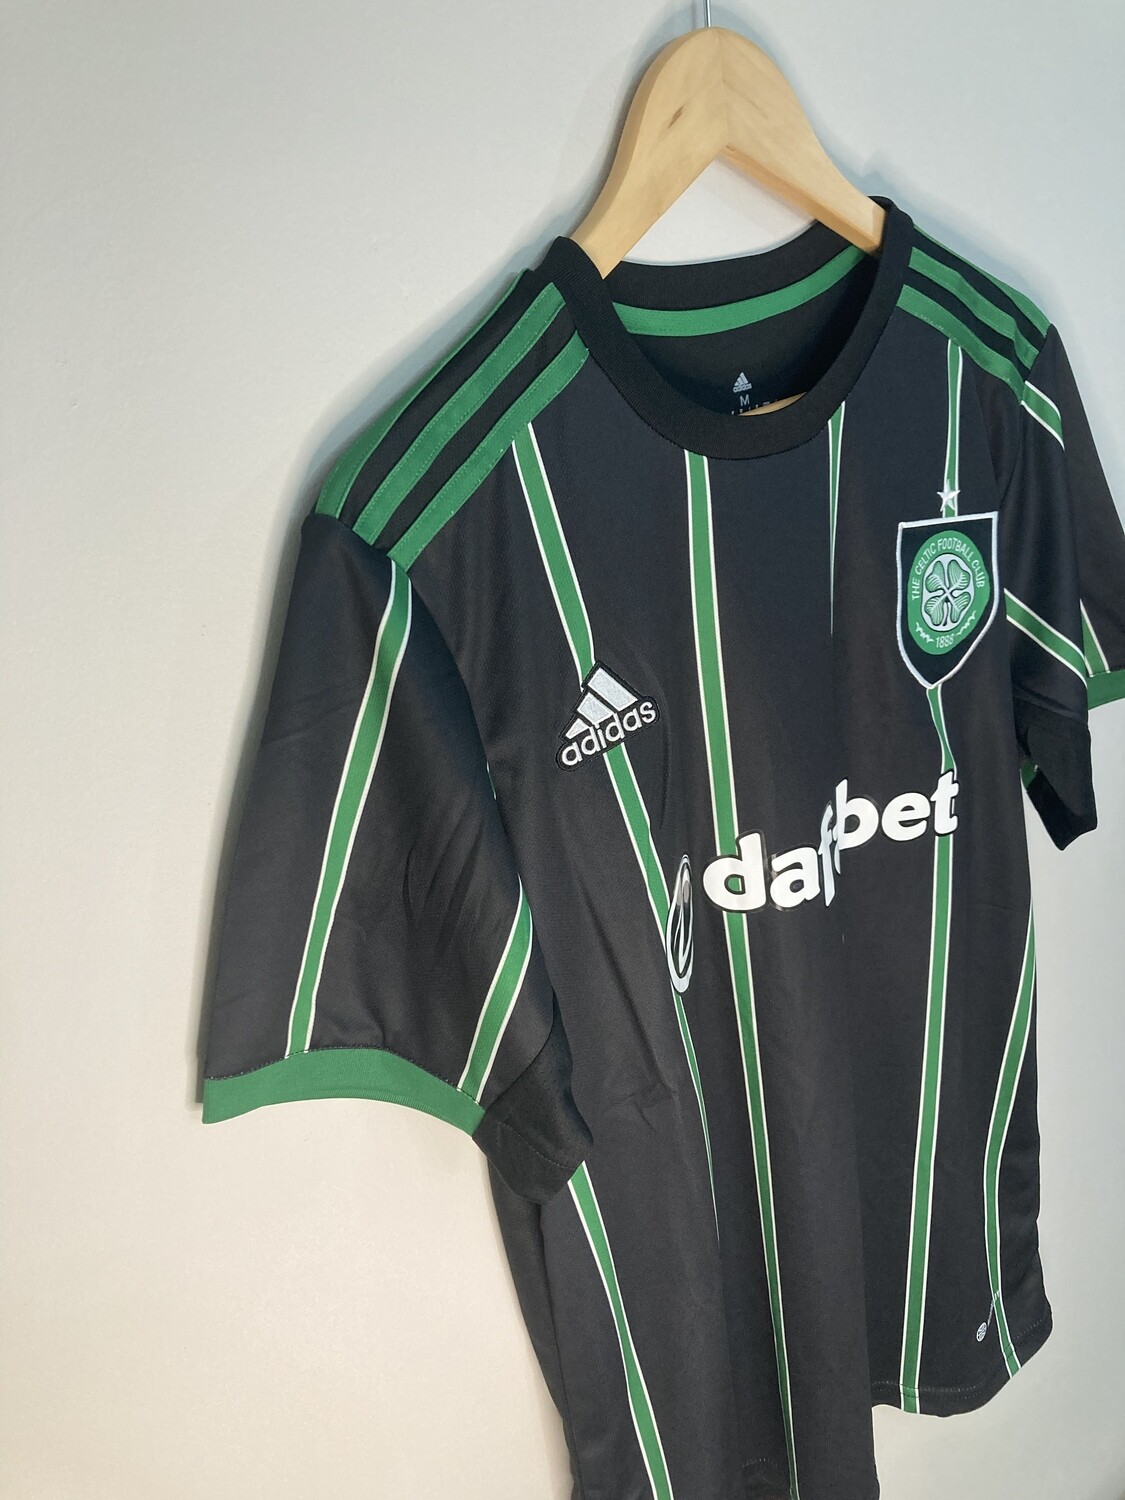 Celtic 22/23 Training Football Jersey for sale in Co. Louth for